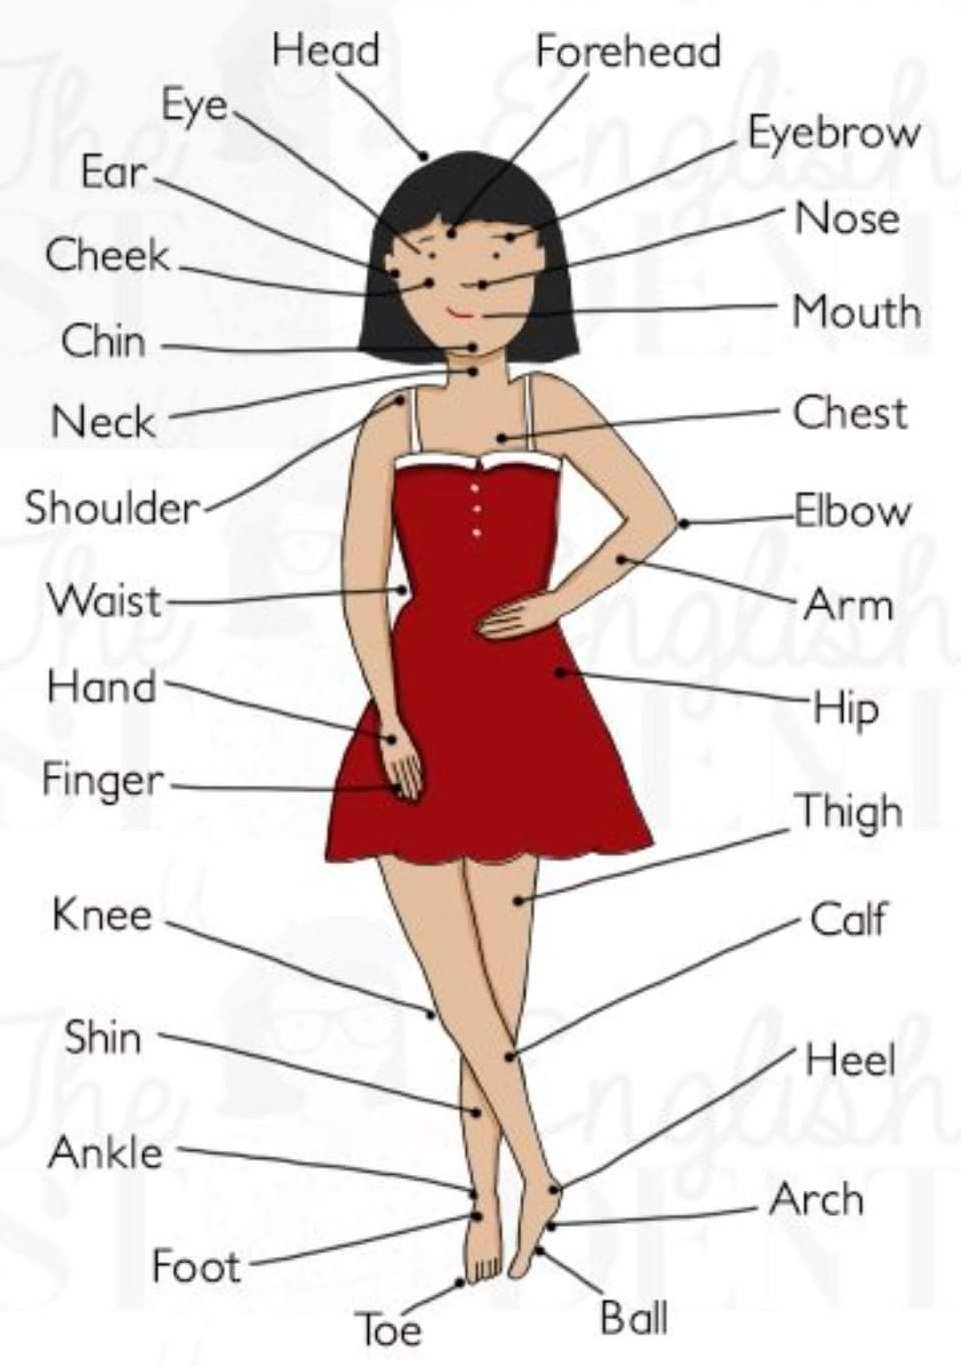 Body Parts Name in English with Pictures  Human body parts, Human body  vocabulary, Body parts